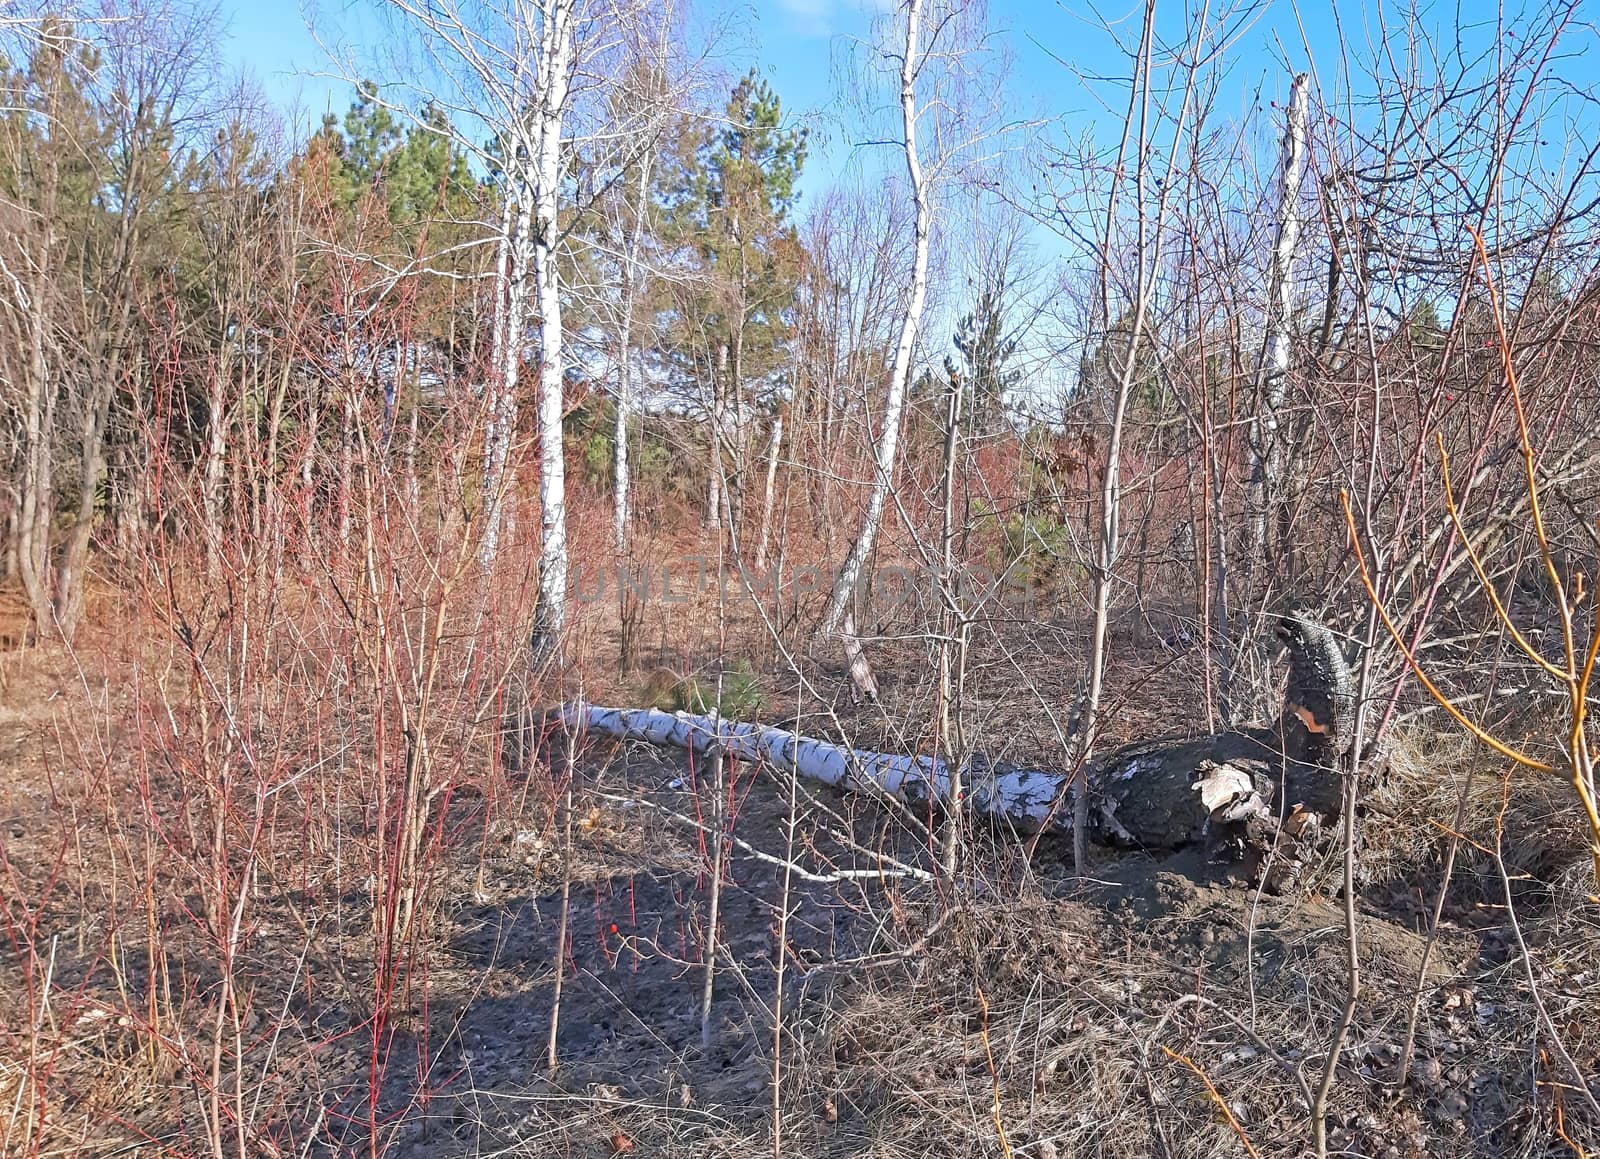 Birch tree felled in a forest in the early spring.